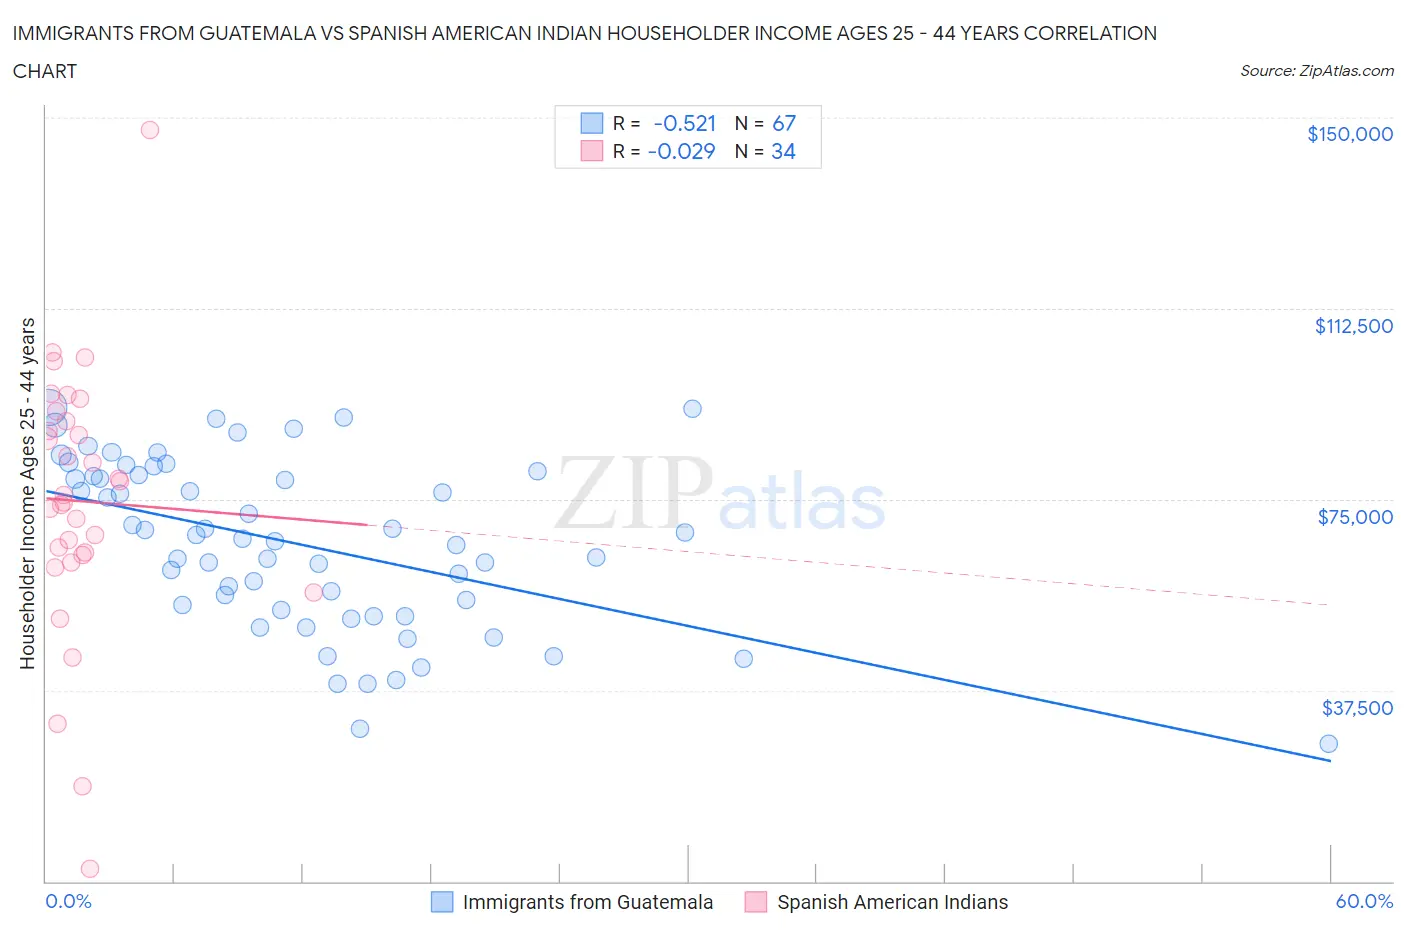 Immigrants from Guatemala vs Spanish American Indian Householder Income Ages 25 - 44 years